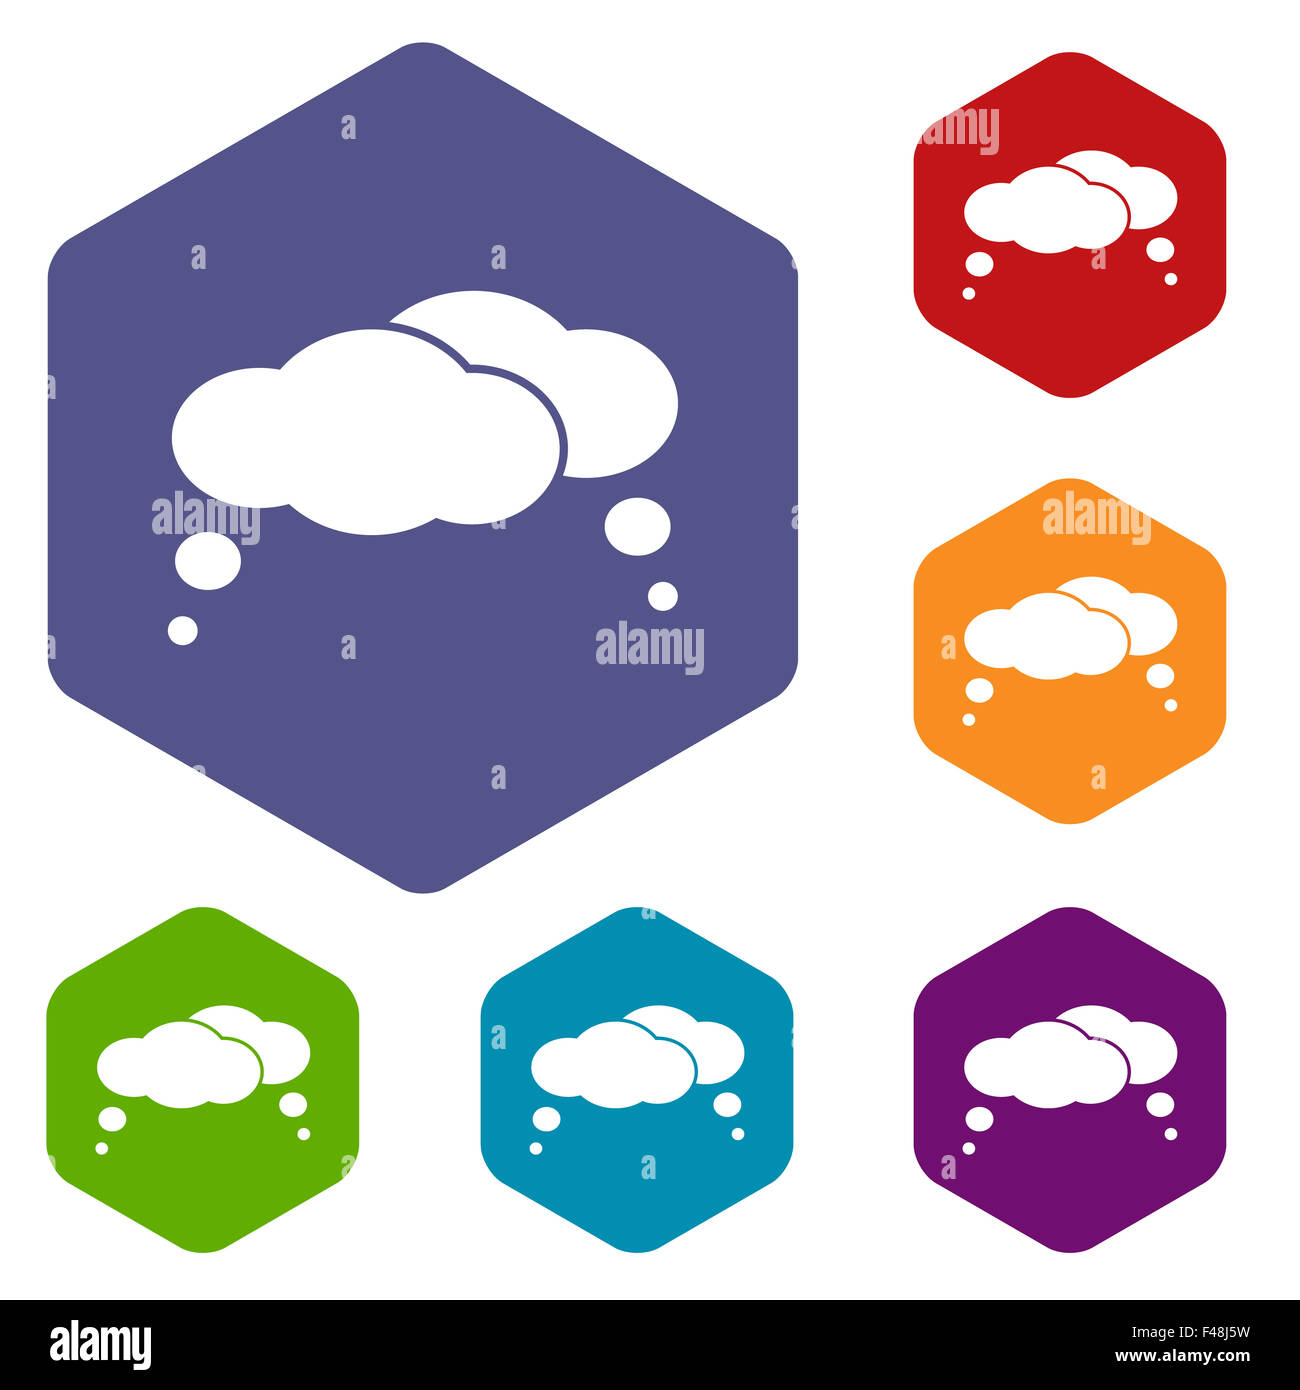 Clouds rhombus icons Stock Photo